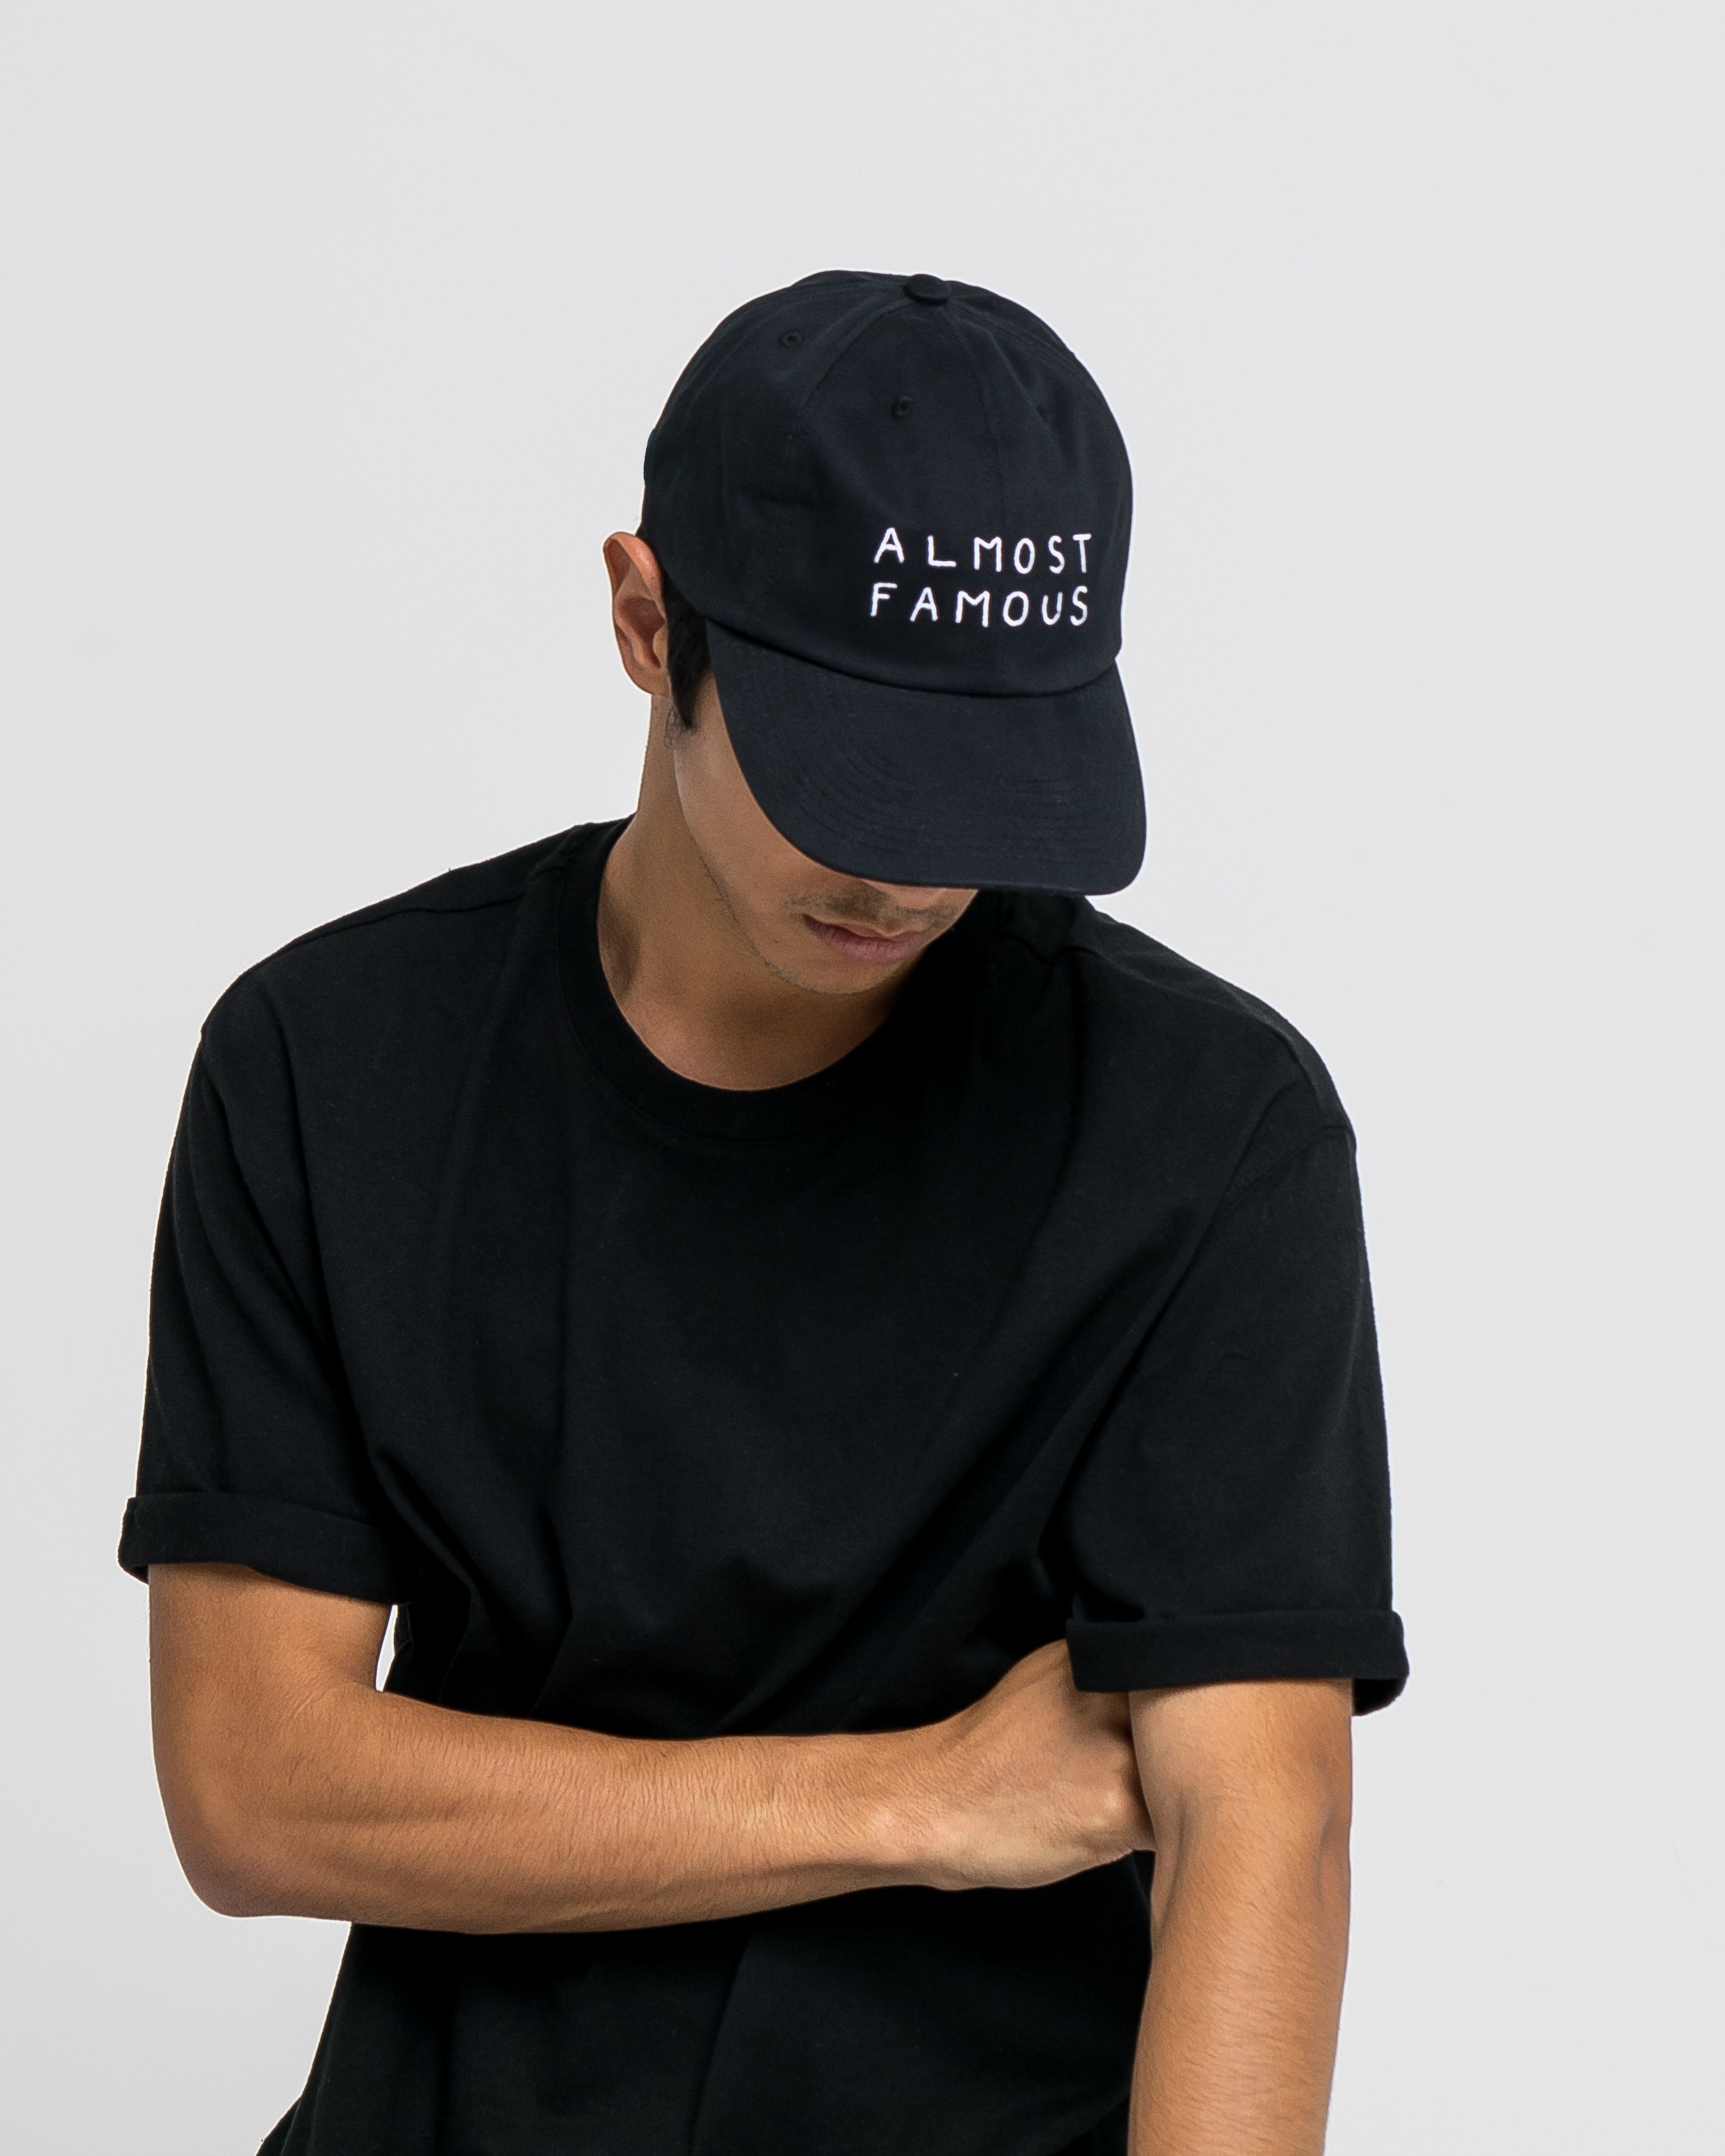 Black unisex baseball hat with white embroidery "Almost famous" from French designer brand Nasaseasons